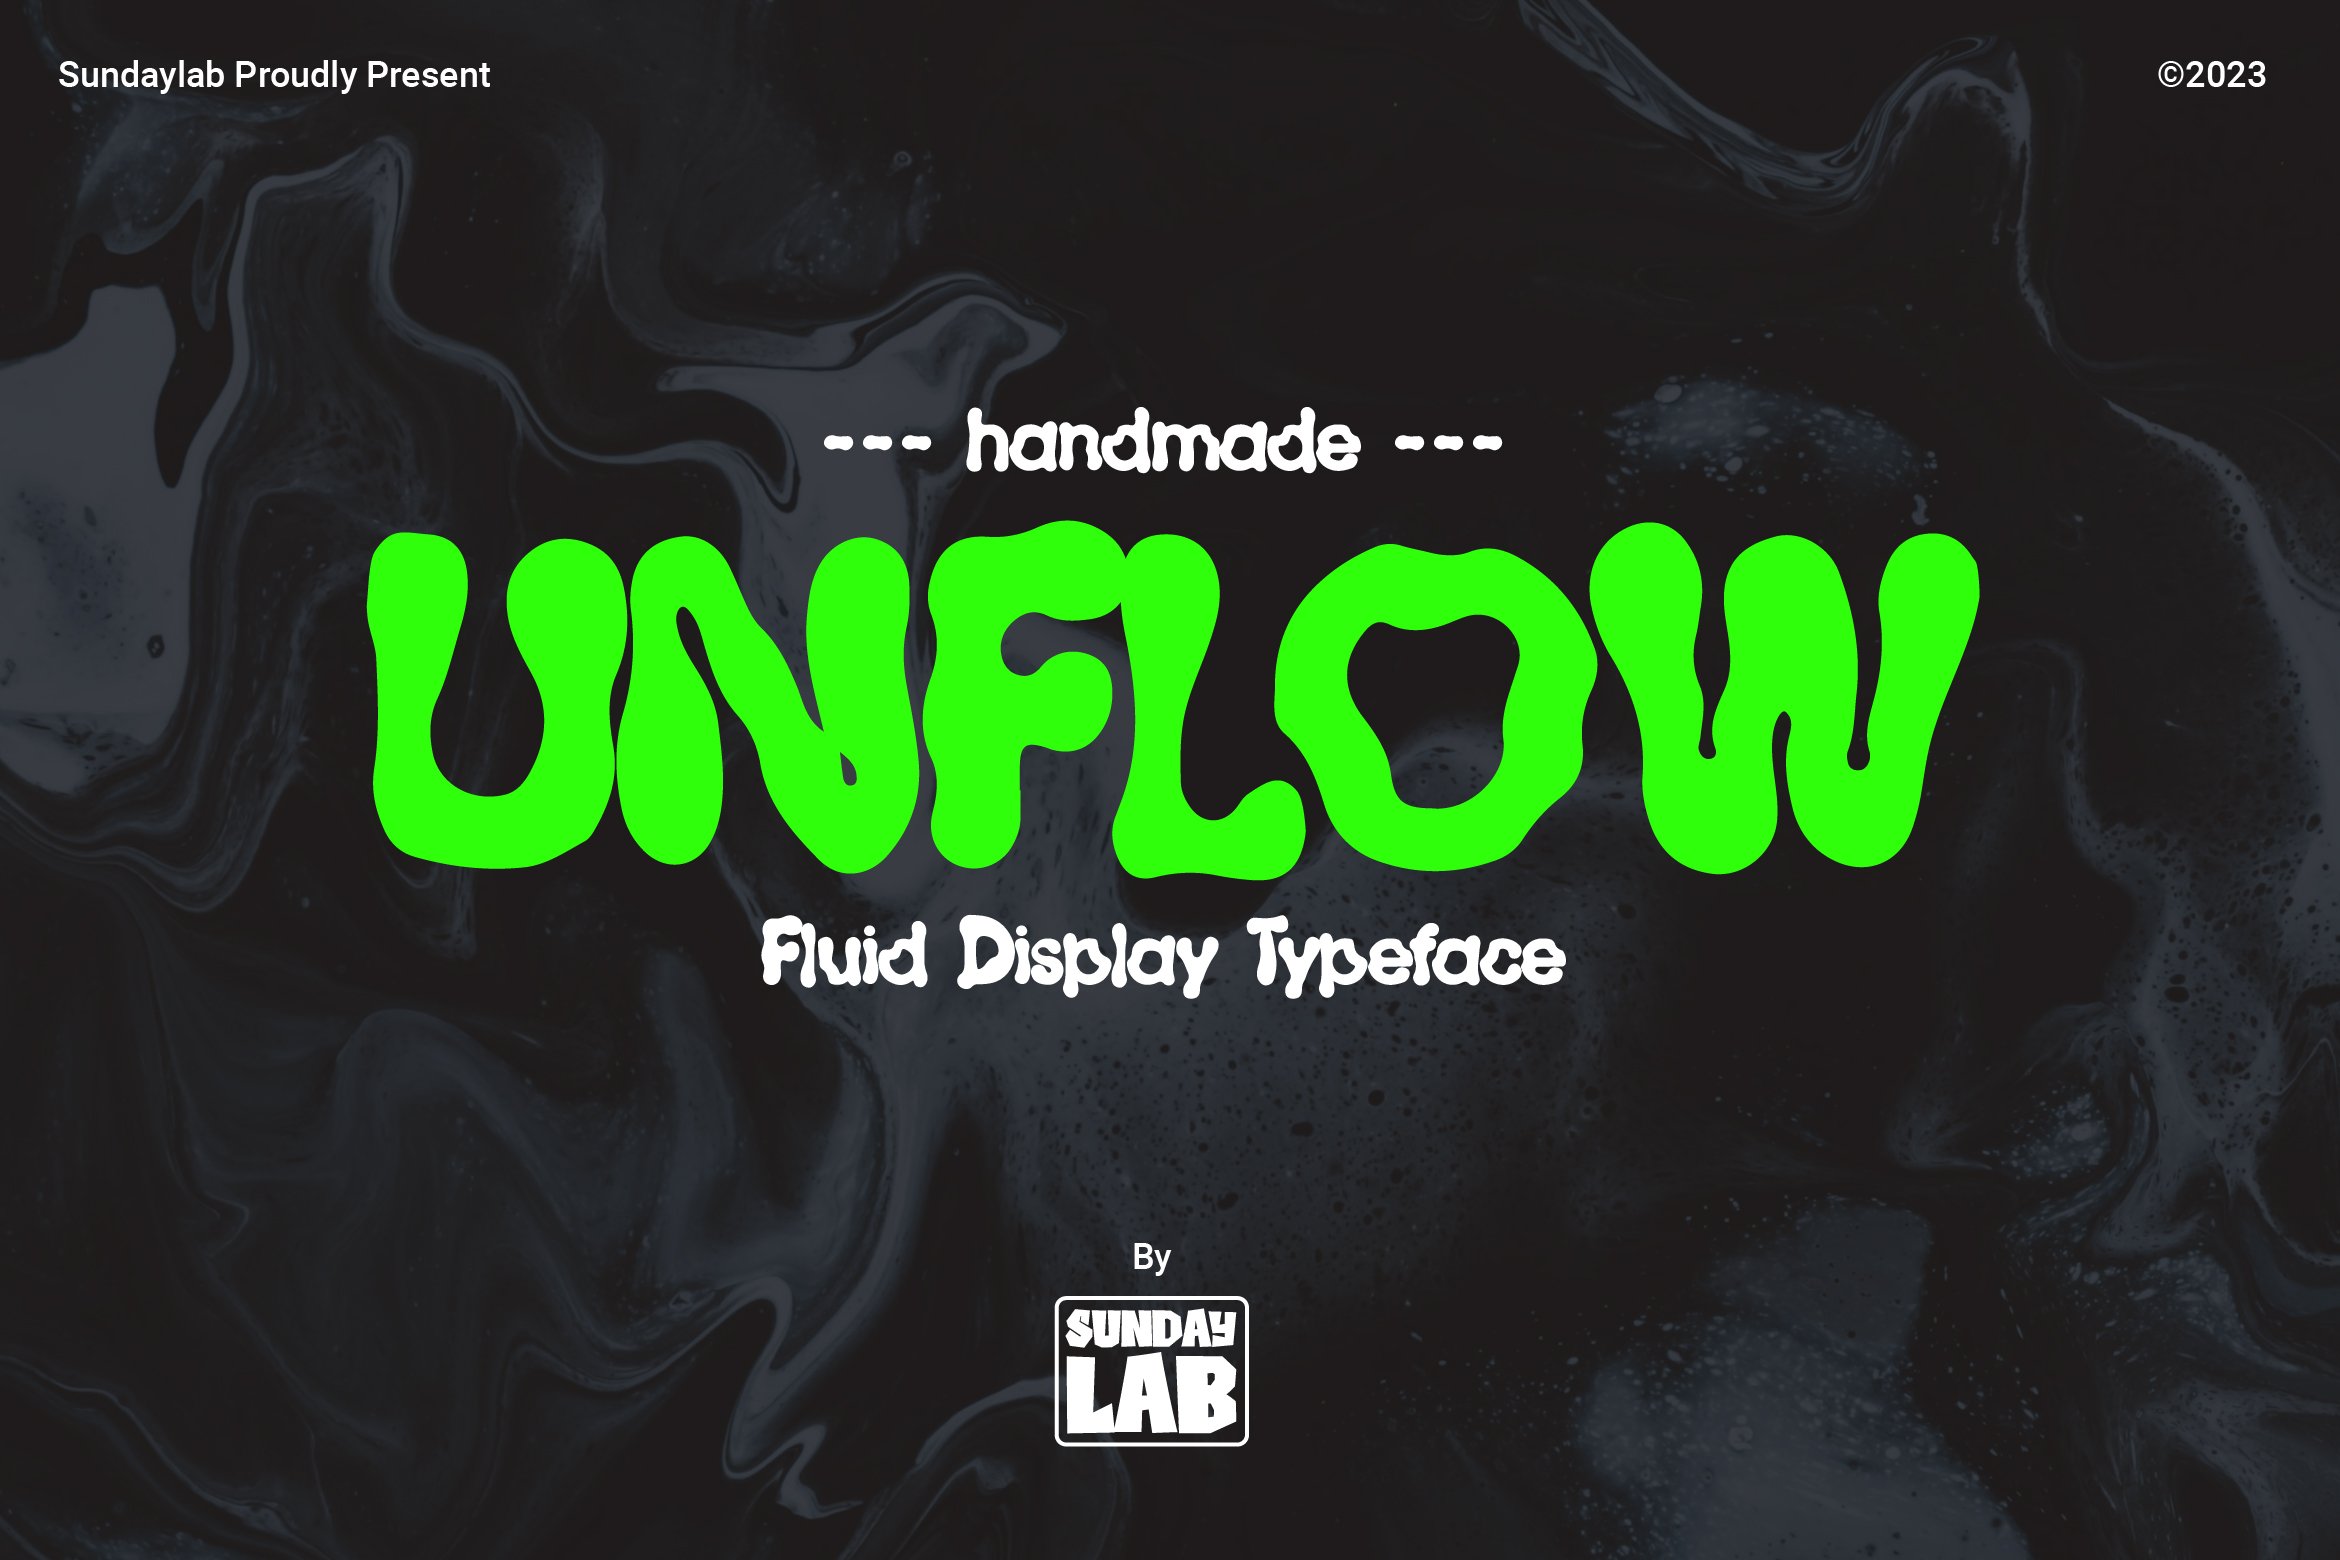 Unflow Typeface cover image.